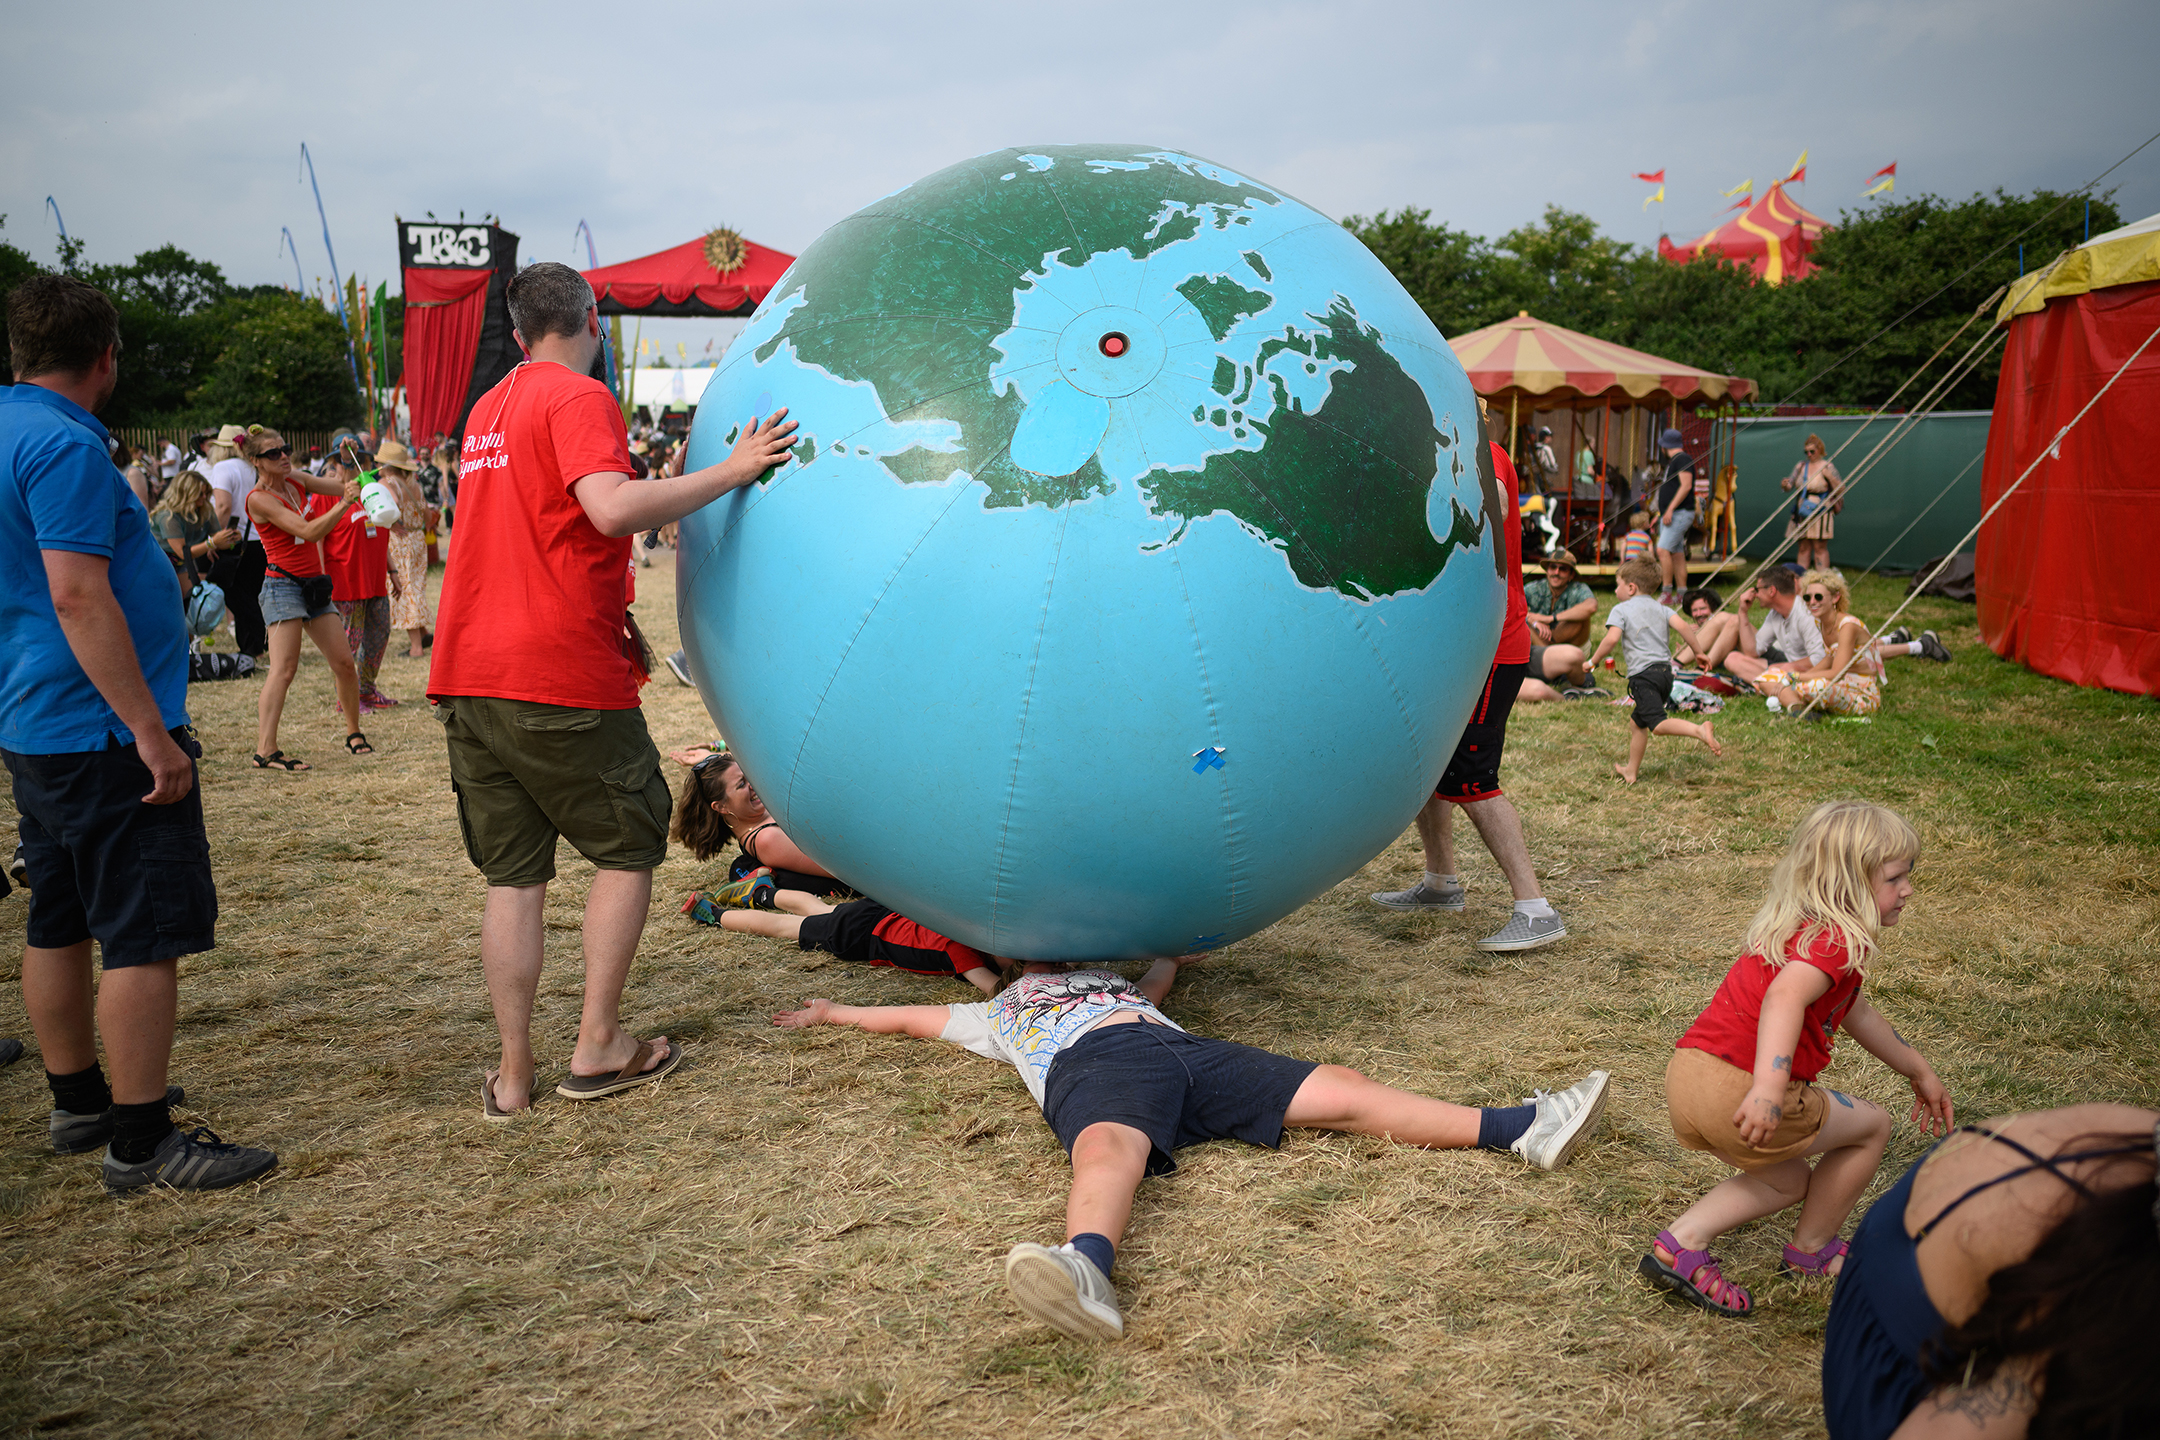 People playing with a giant inflatable globe in a field